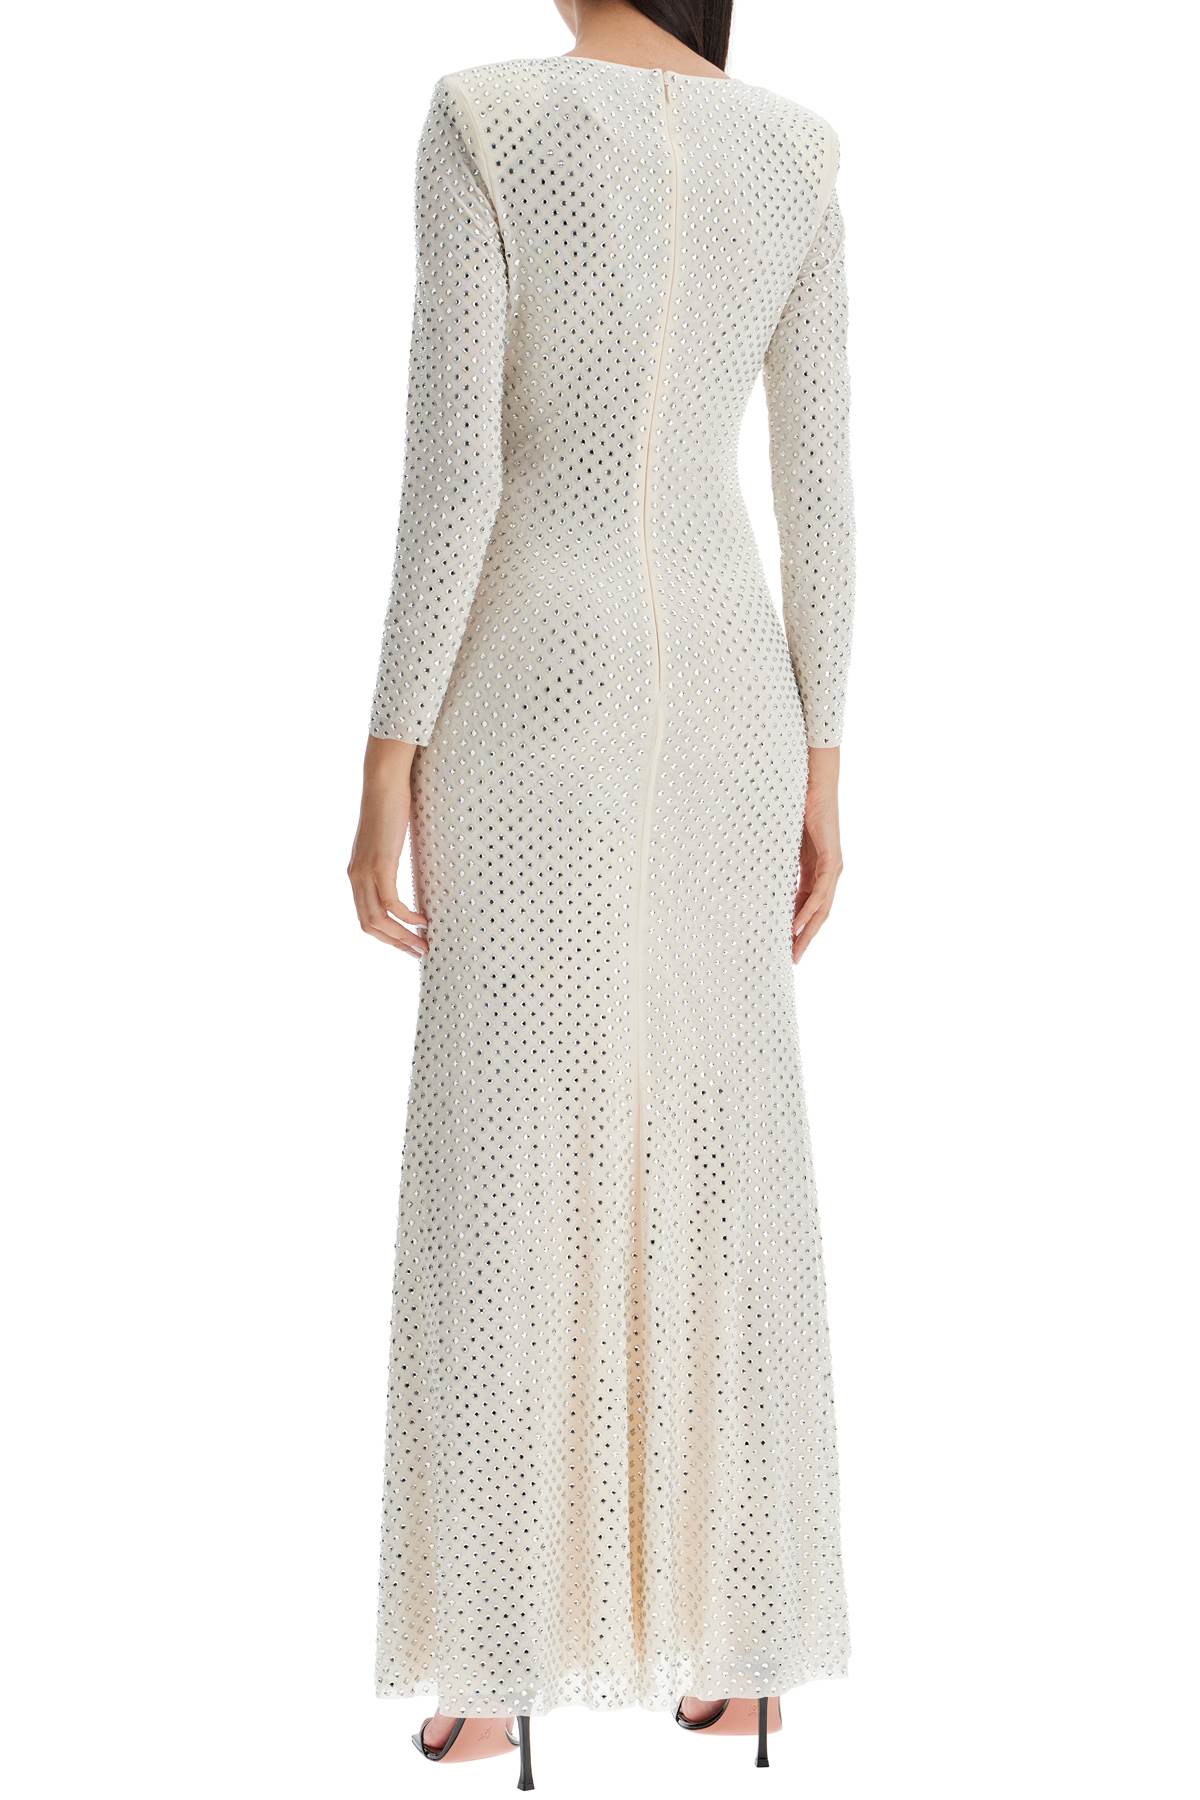 SELF-PORTRAIT LONG MESH DRESS WITH CRYSTALS